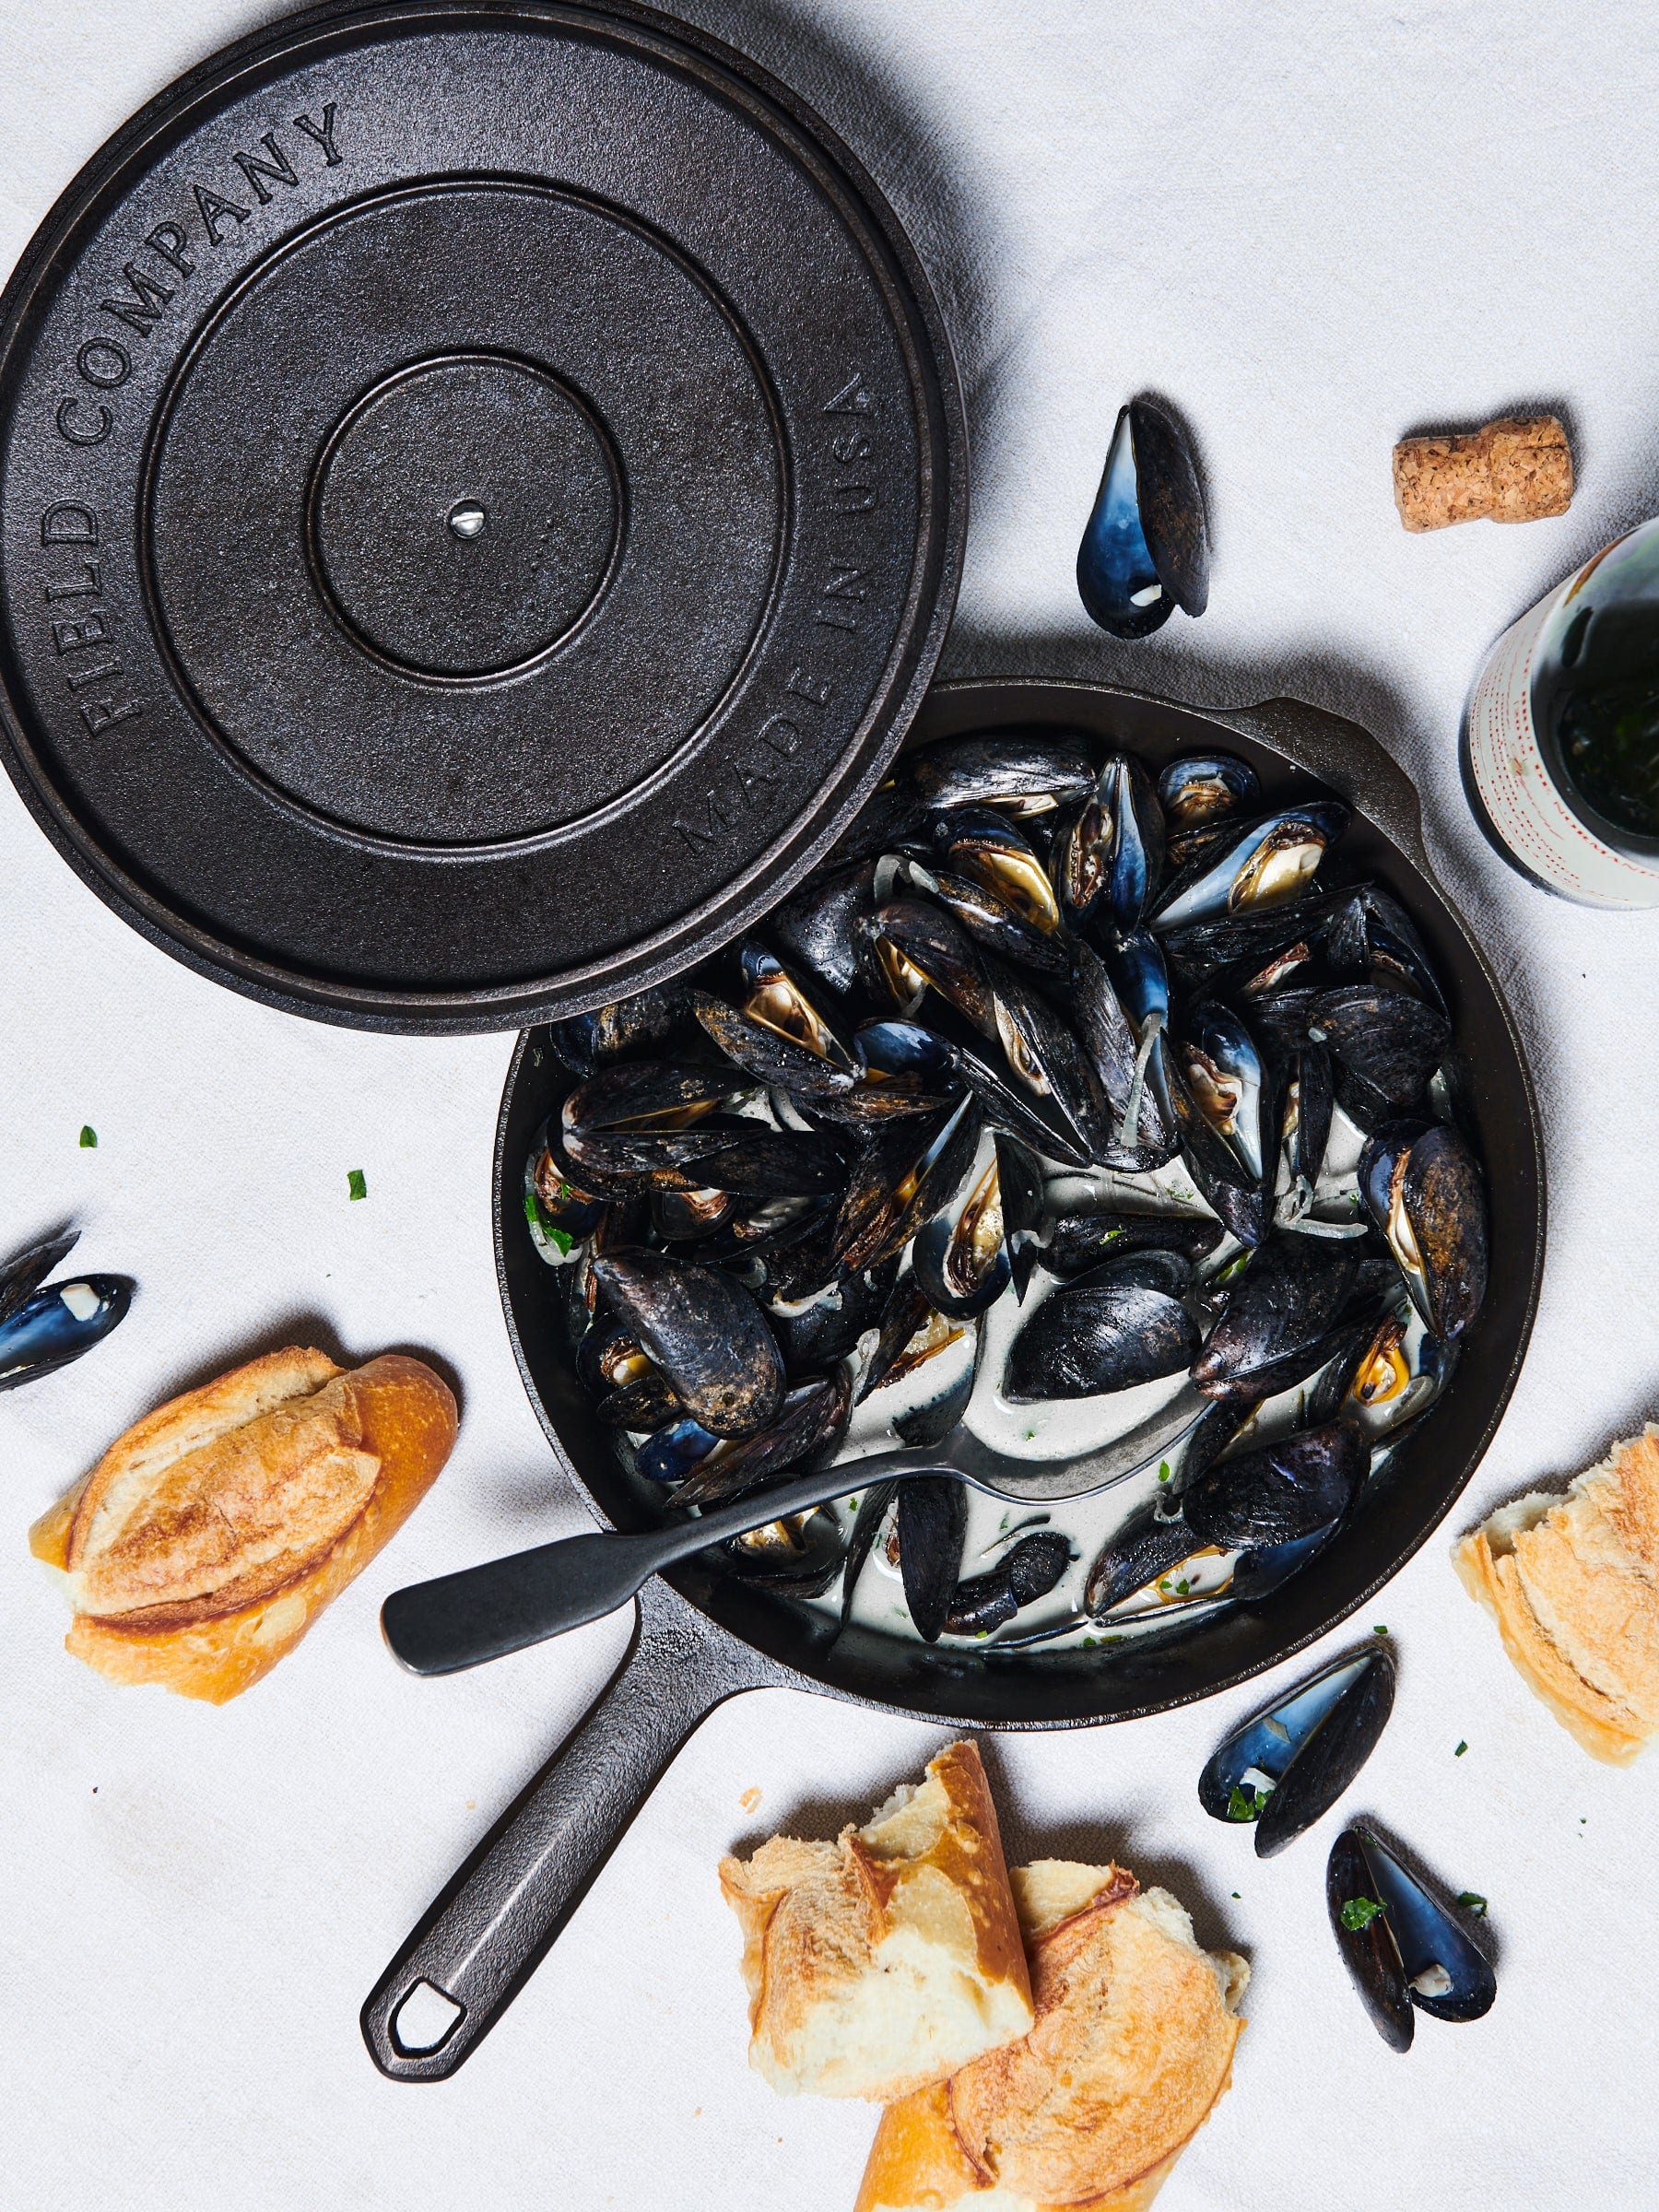 no 8 cast iron skillet with mussels cooking inside